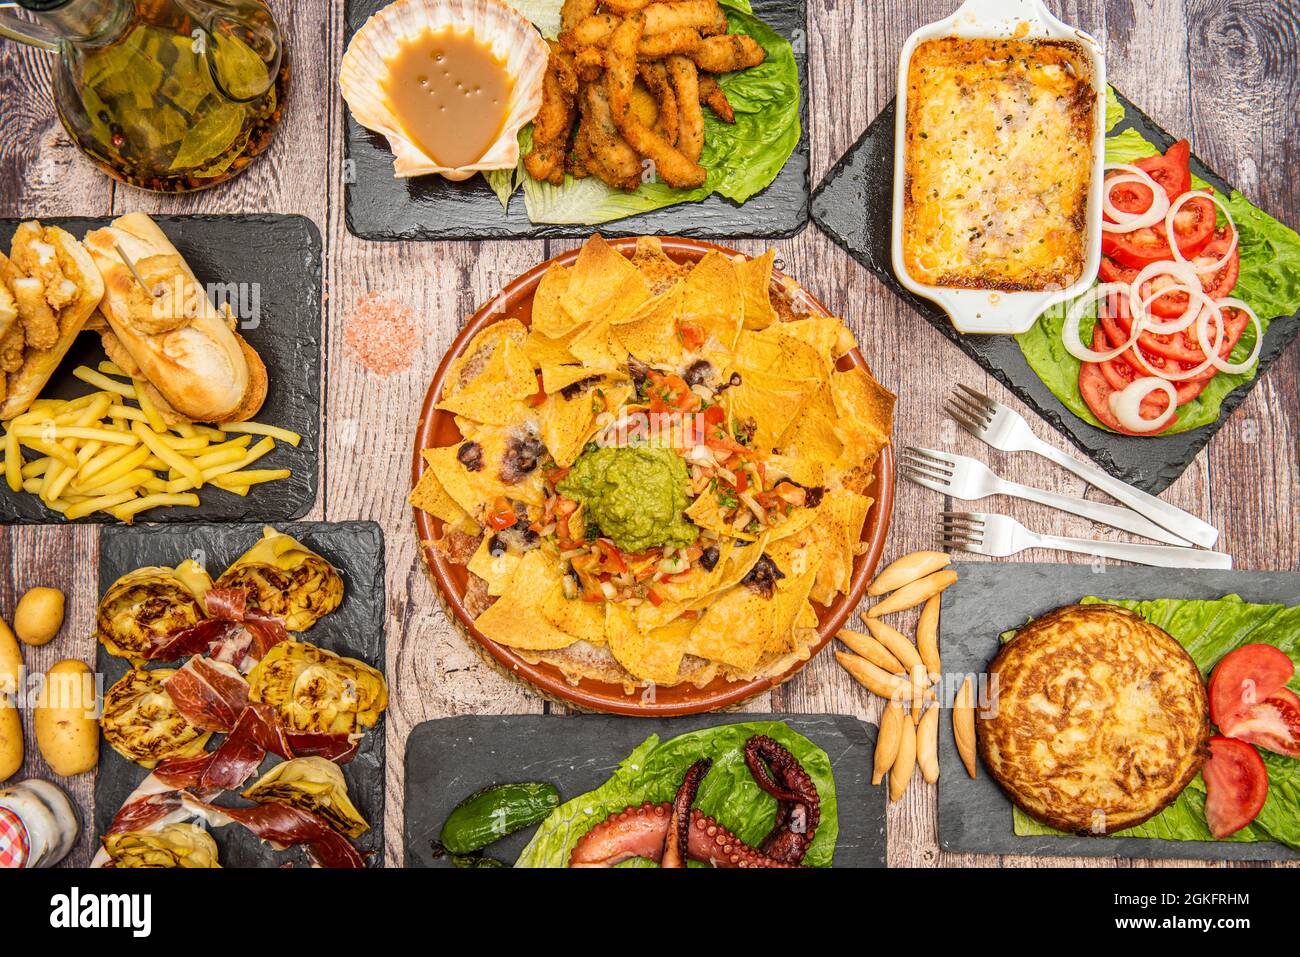 Assorted food dishes with grilled octopus, Spanish omelette, ears of bread, nachos with Mexican guacamole, artichoke flowers, parmigiana and salad Stock Photo